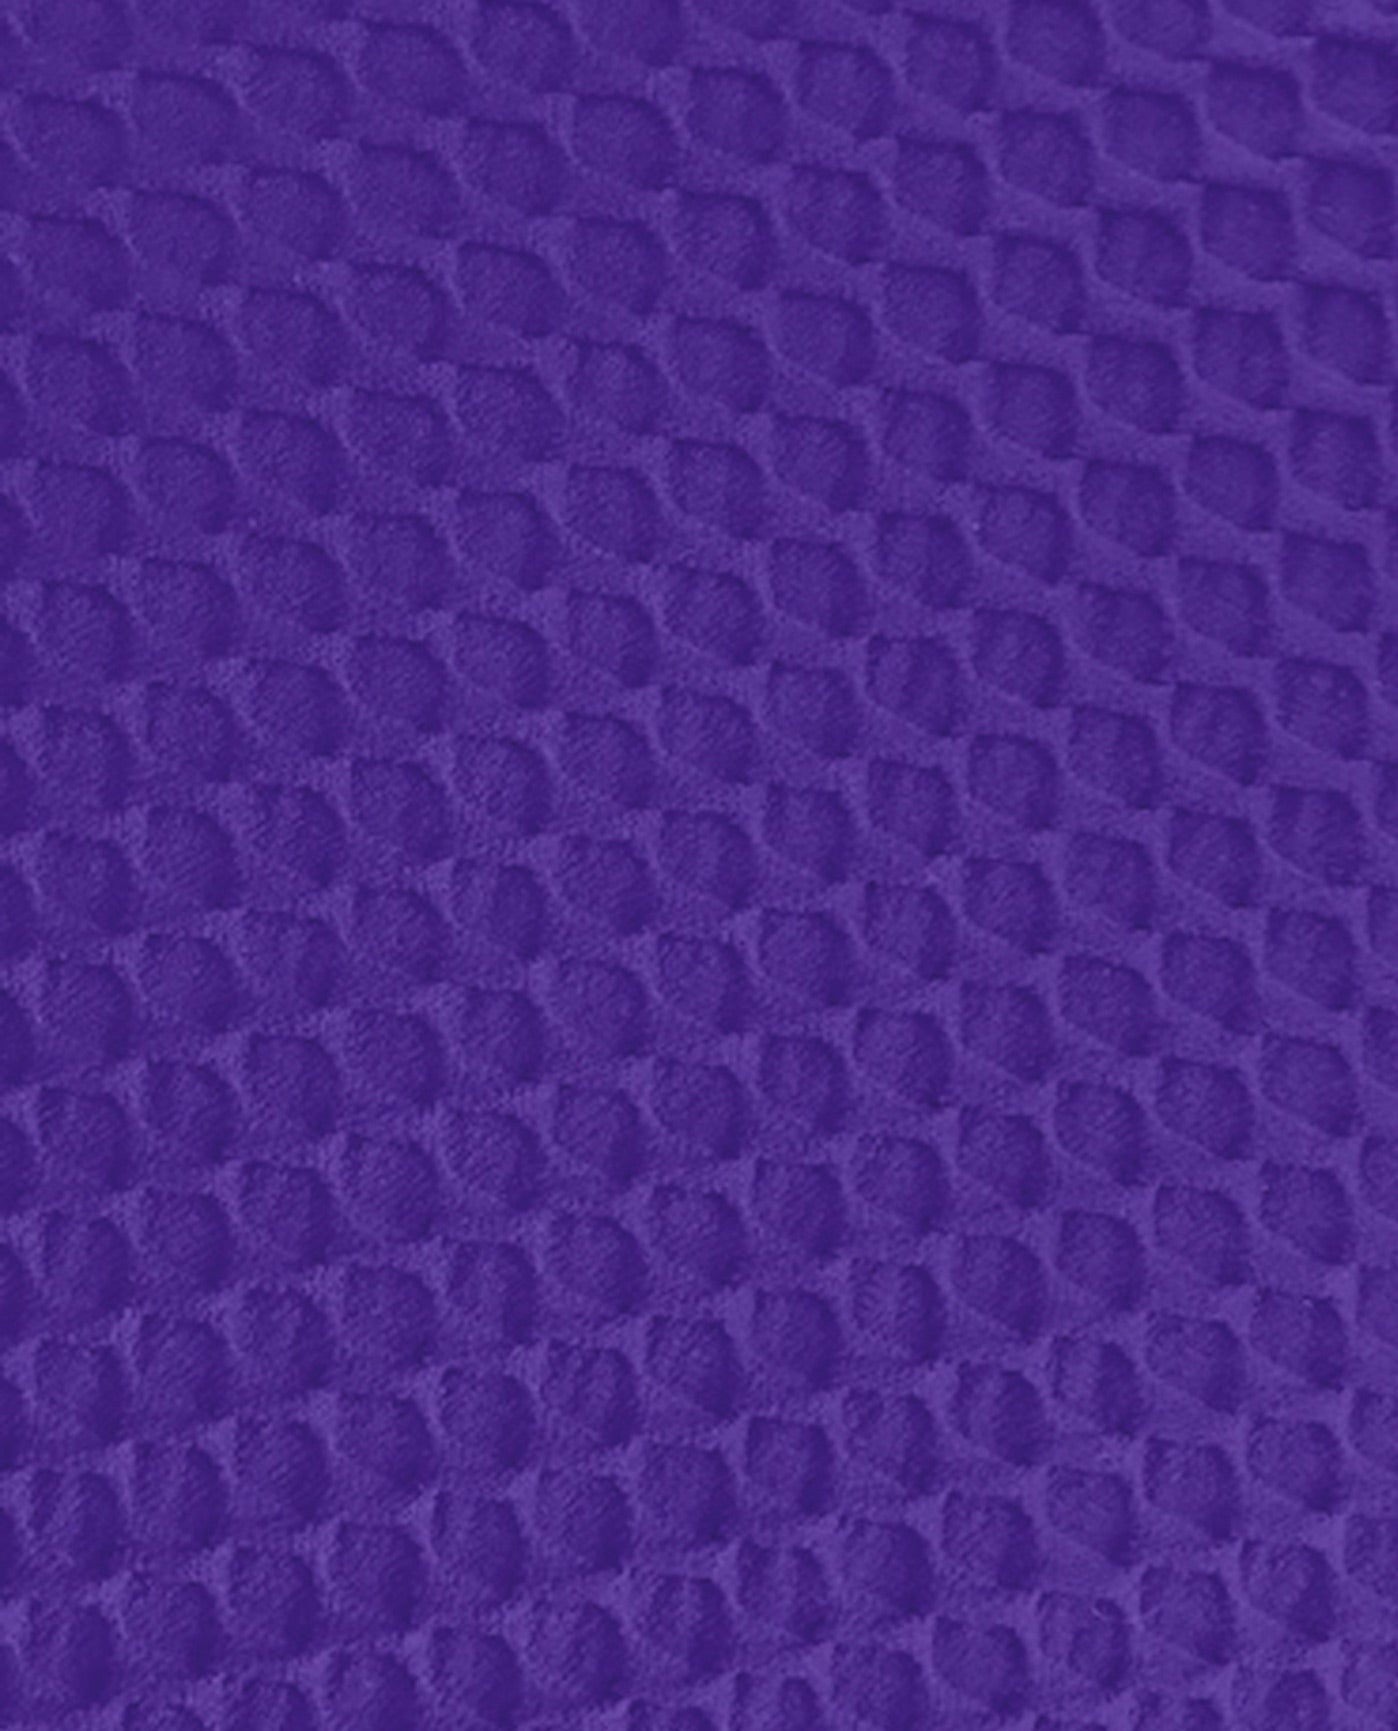 FABRIC SWATCH VIEW OF CHLORINE RESISTANT AQUAMORE SOLID TEXTURED EMPIRE ONE PIECE SWIMSUIT | 510 AQT TEXTURED PURPLE